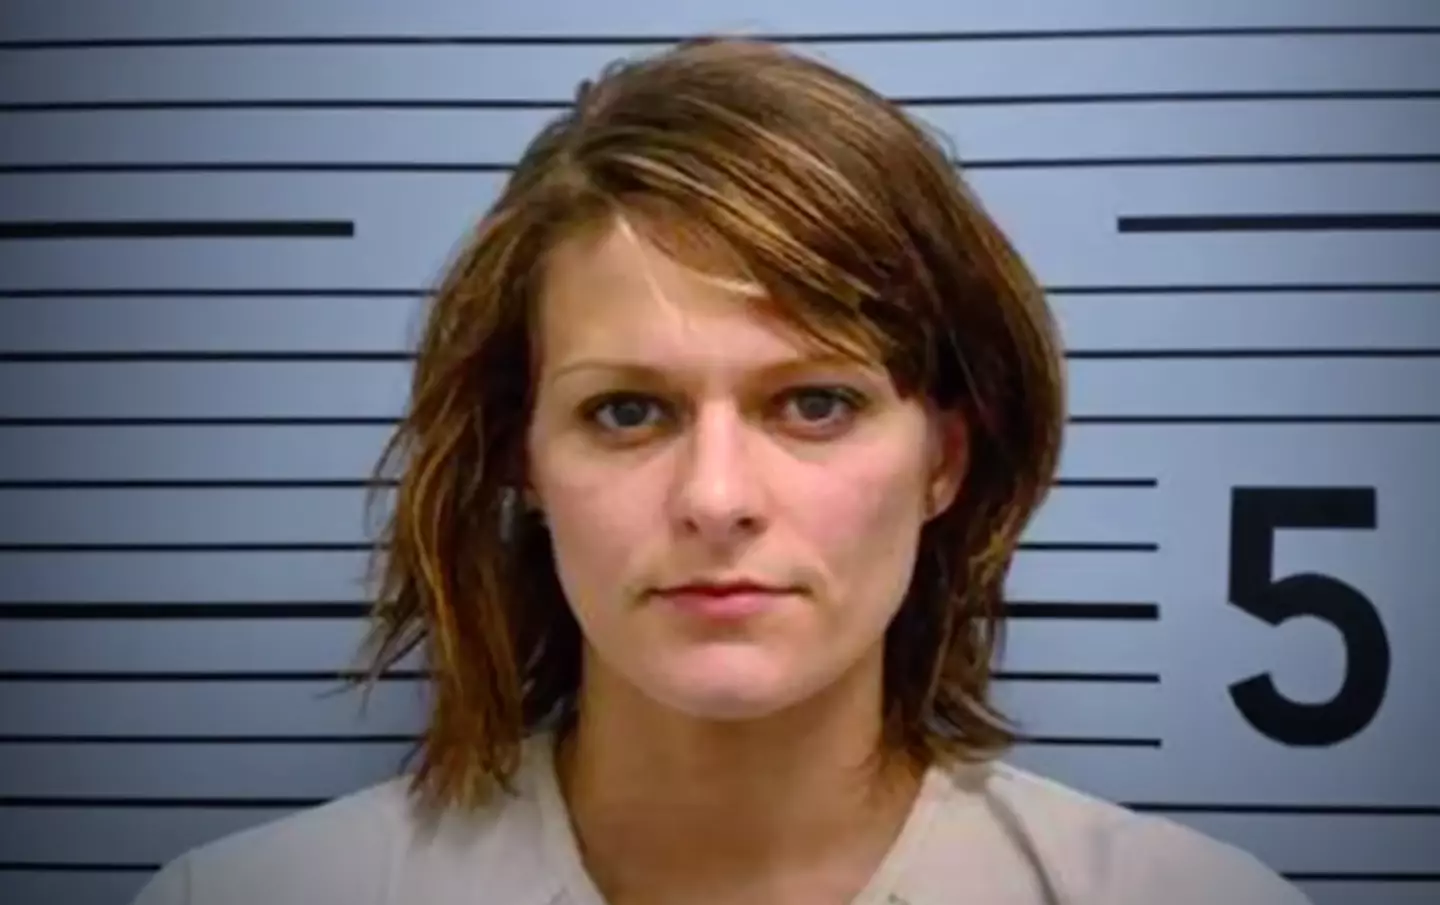 Brittany Smith was sentenced to 20 years in prison for the murder of Todd Smith.